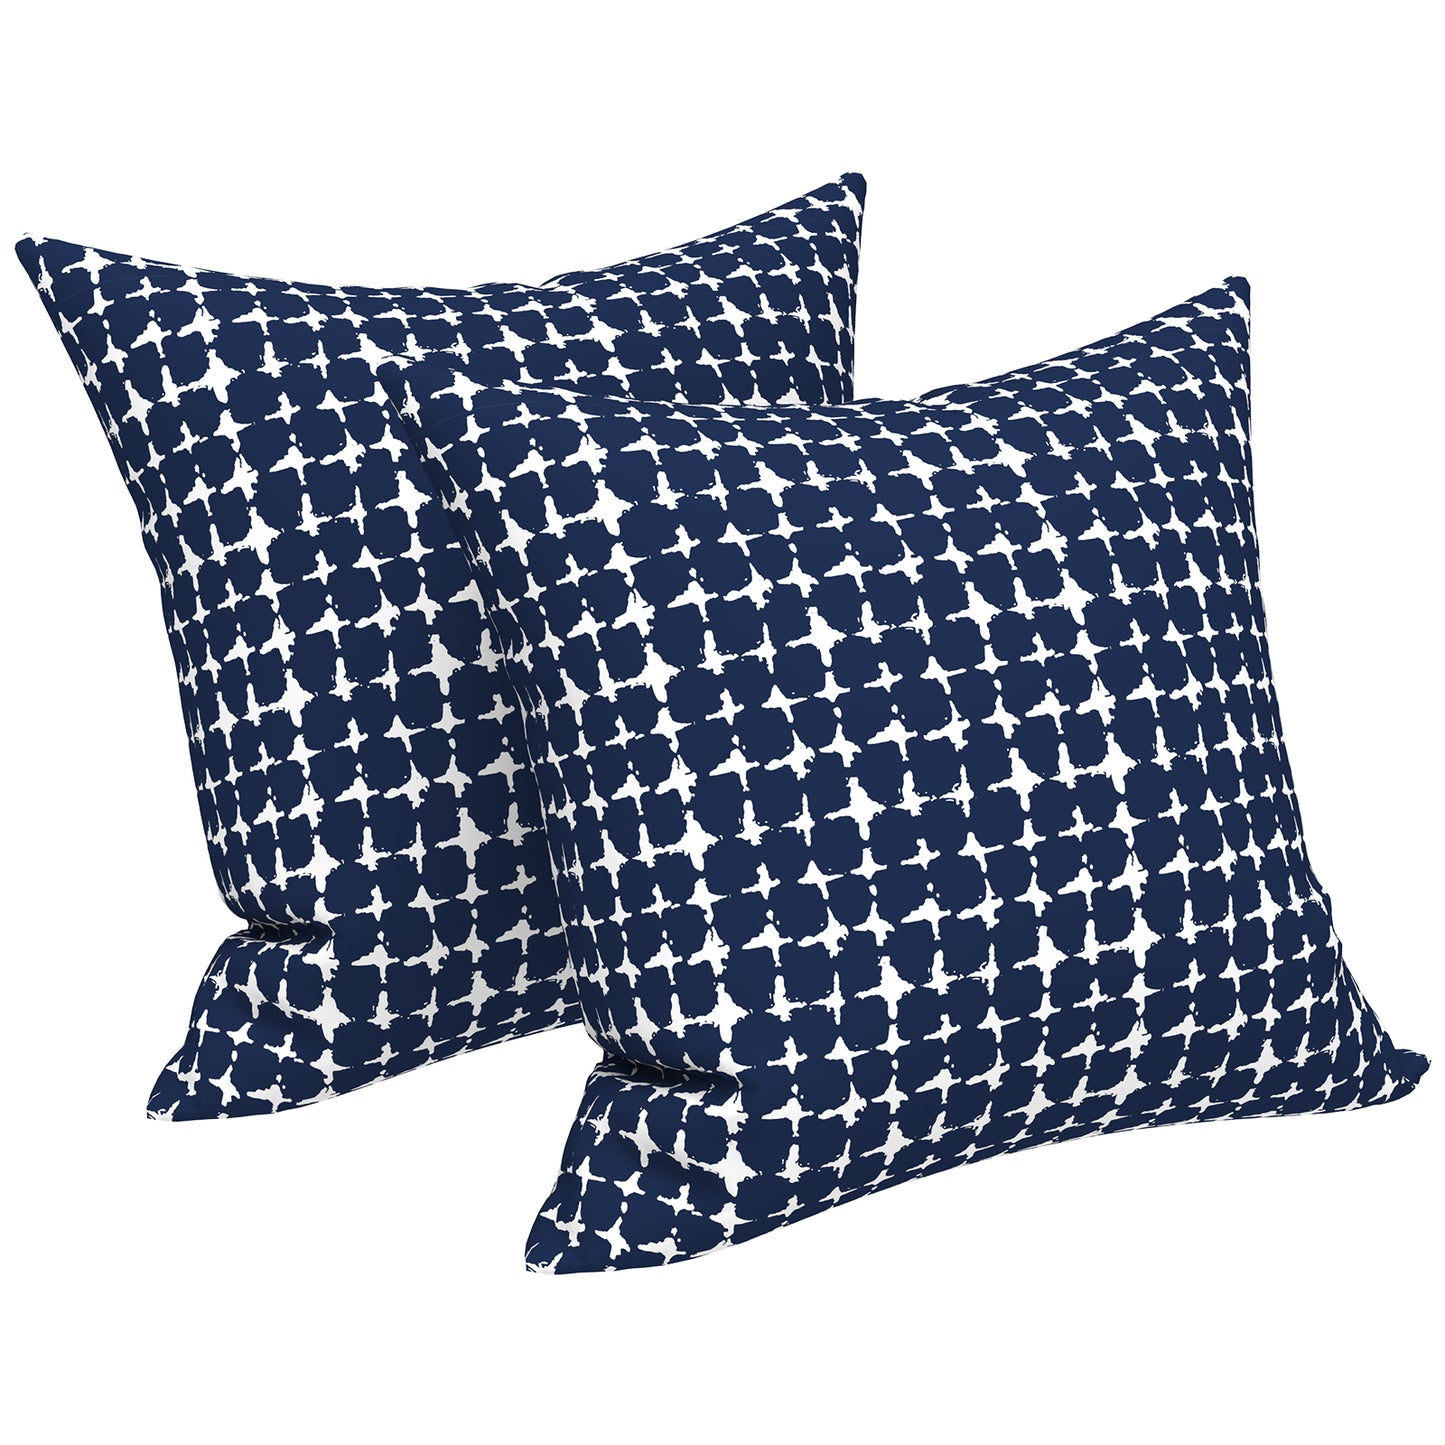 Melody Elephant Outdoor Throw Pillow Covers Pack of 2, Decorative Water Repellent Square Pillow Cases 18x18 Inch, Patio Pillowcases for Home Patio Furniture Use, Tie-Dye Navy